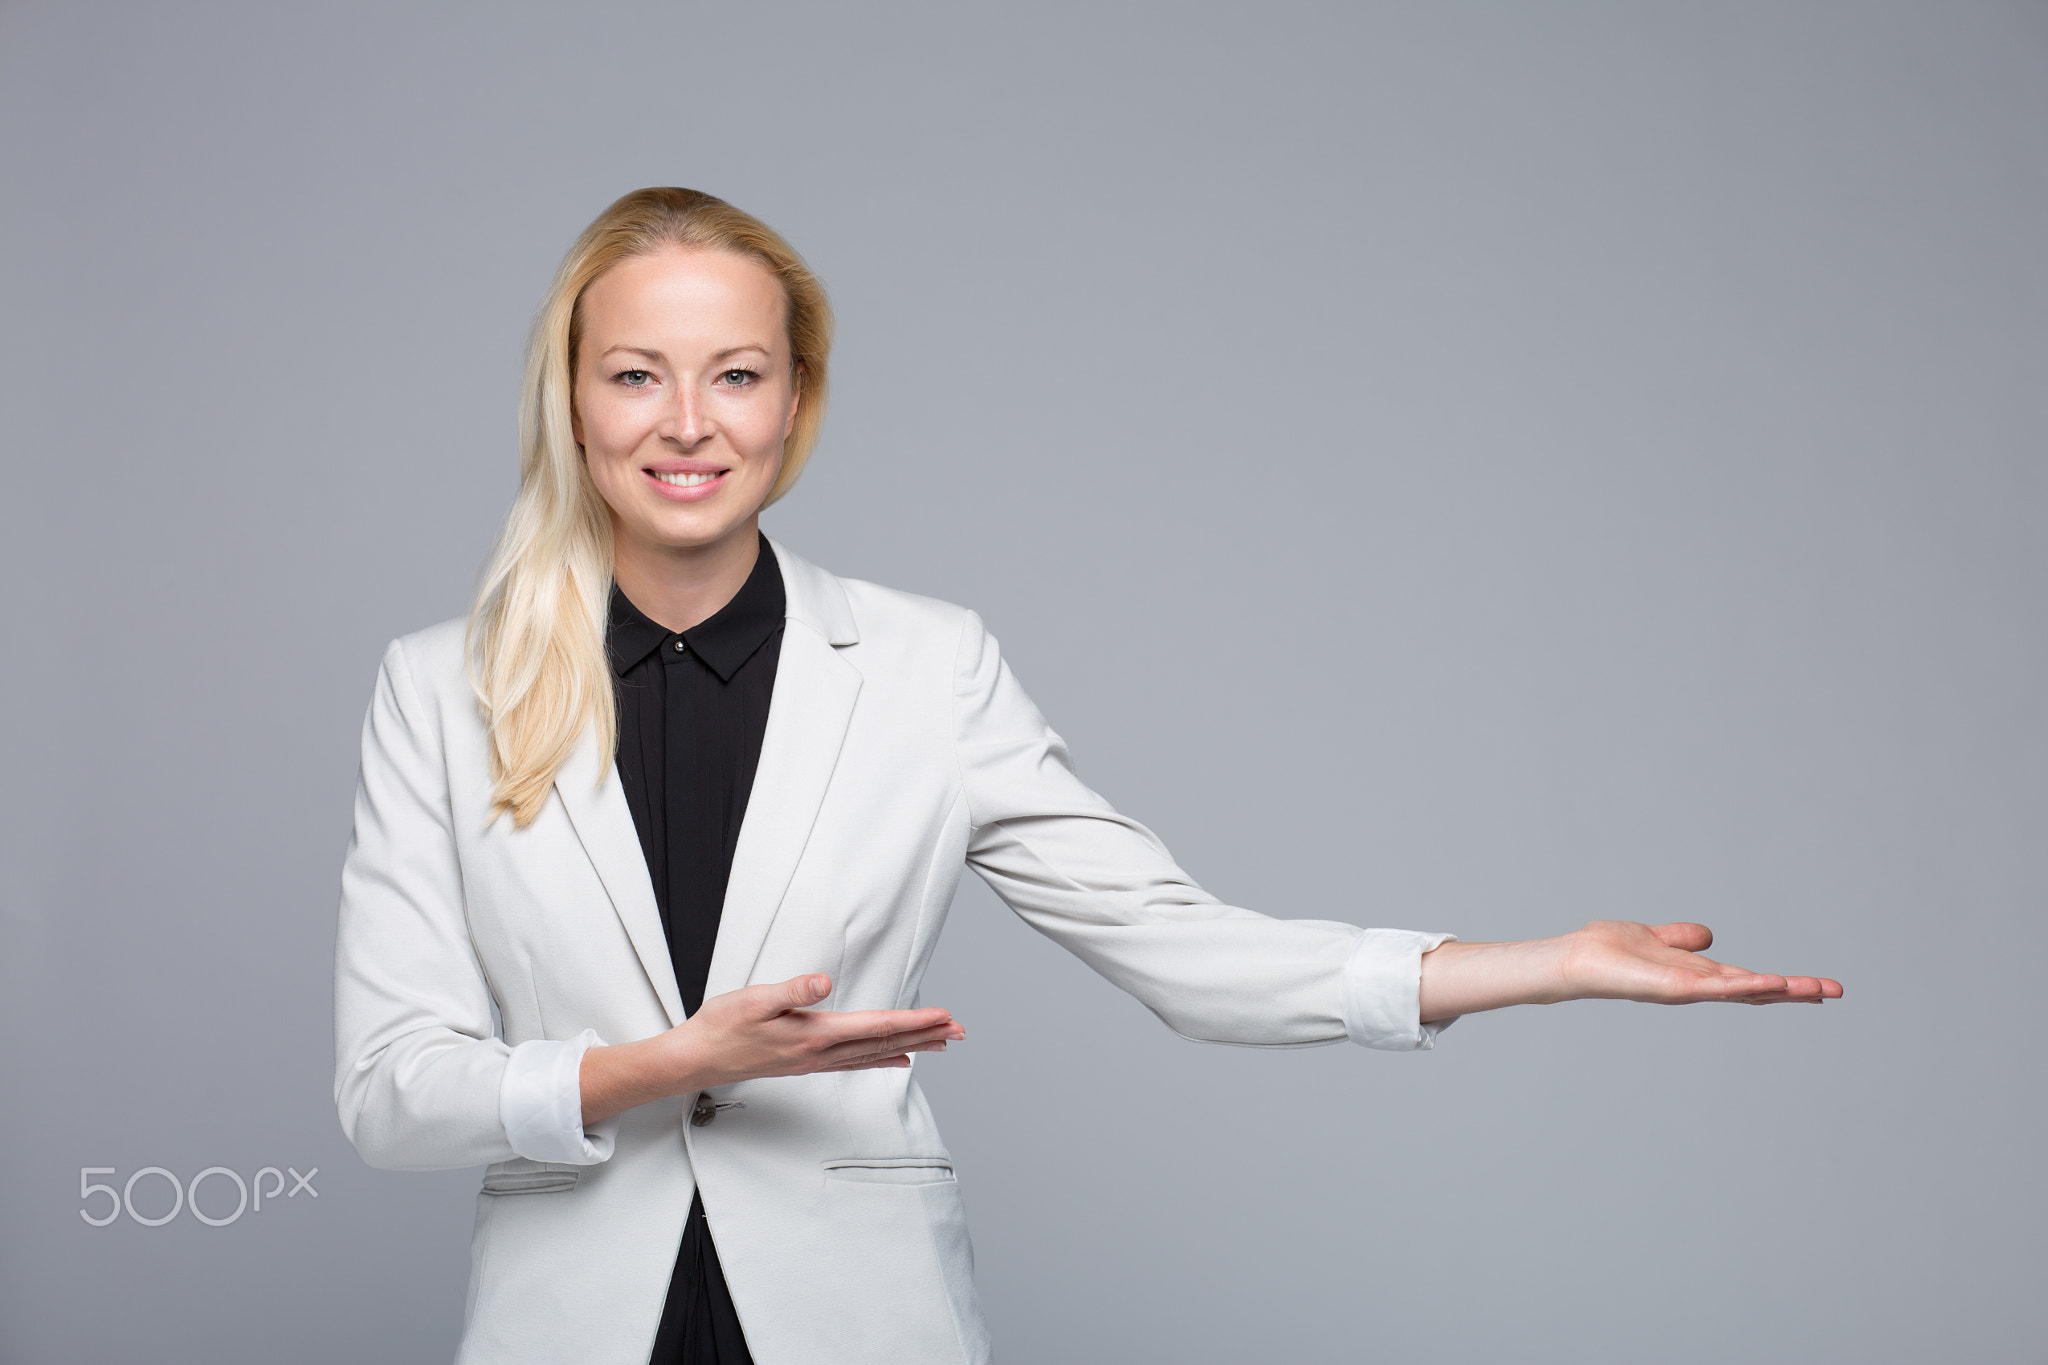 Business woman showing hand sign to side.